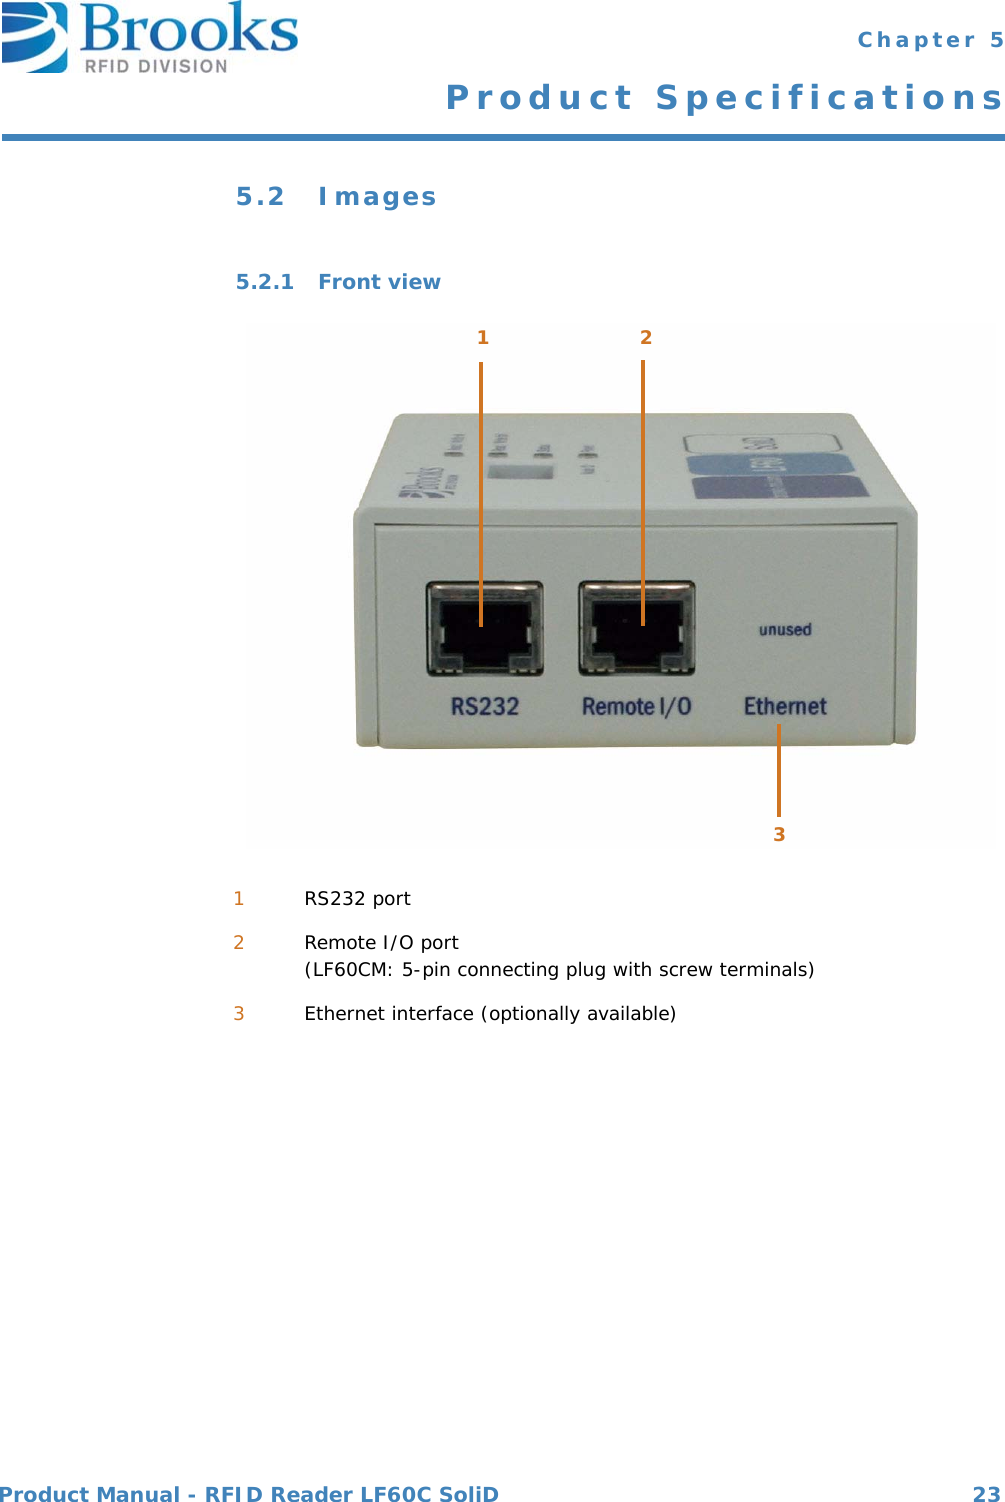 Product Manual - RFID Reader LF60C SoliD 23 Chapter 5Product Specifications5.2 Images5.2.1 Front view1RS232 port2Remote I/O port (LF60CM: 5-pin connecting plug with screw terminals)3Ethernet interface (optionally available)123